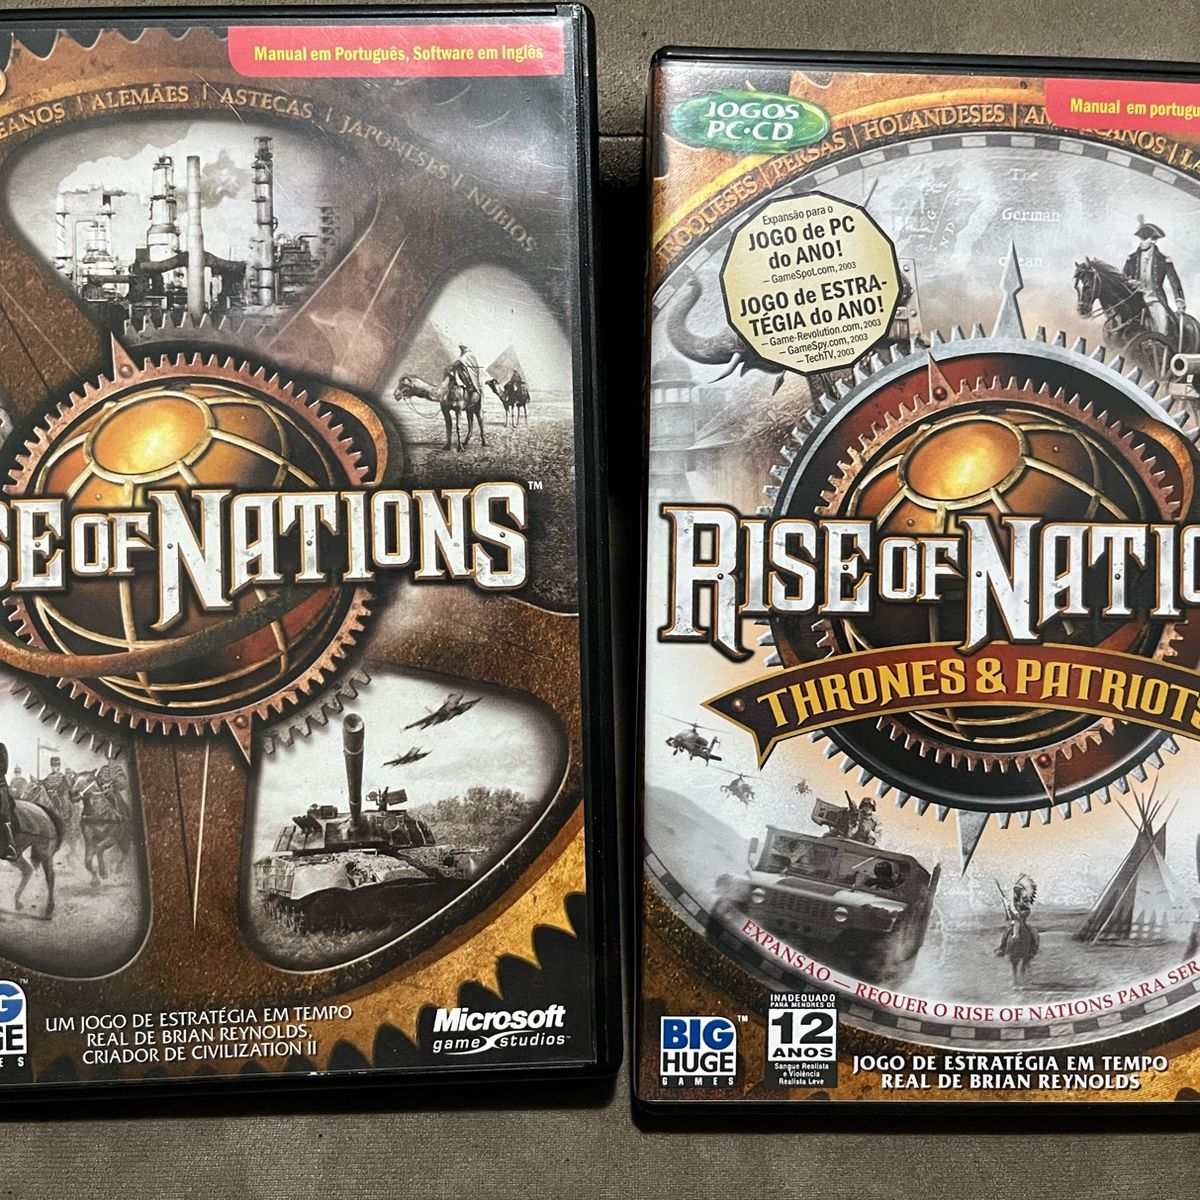 Rise of Nations (2003)